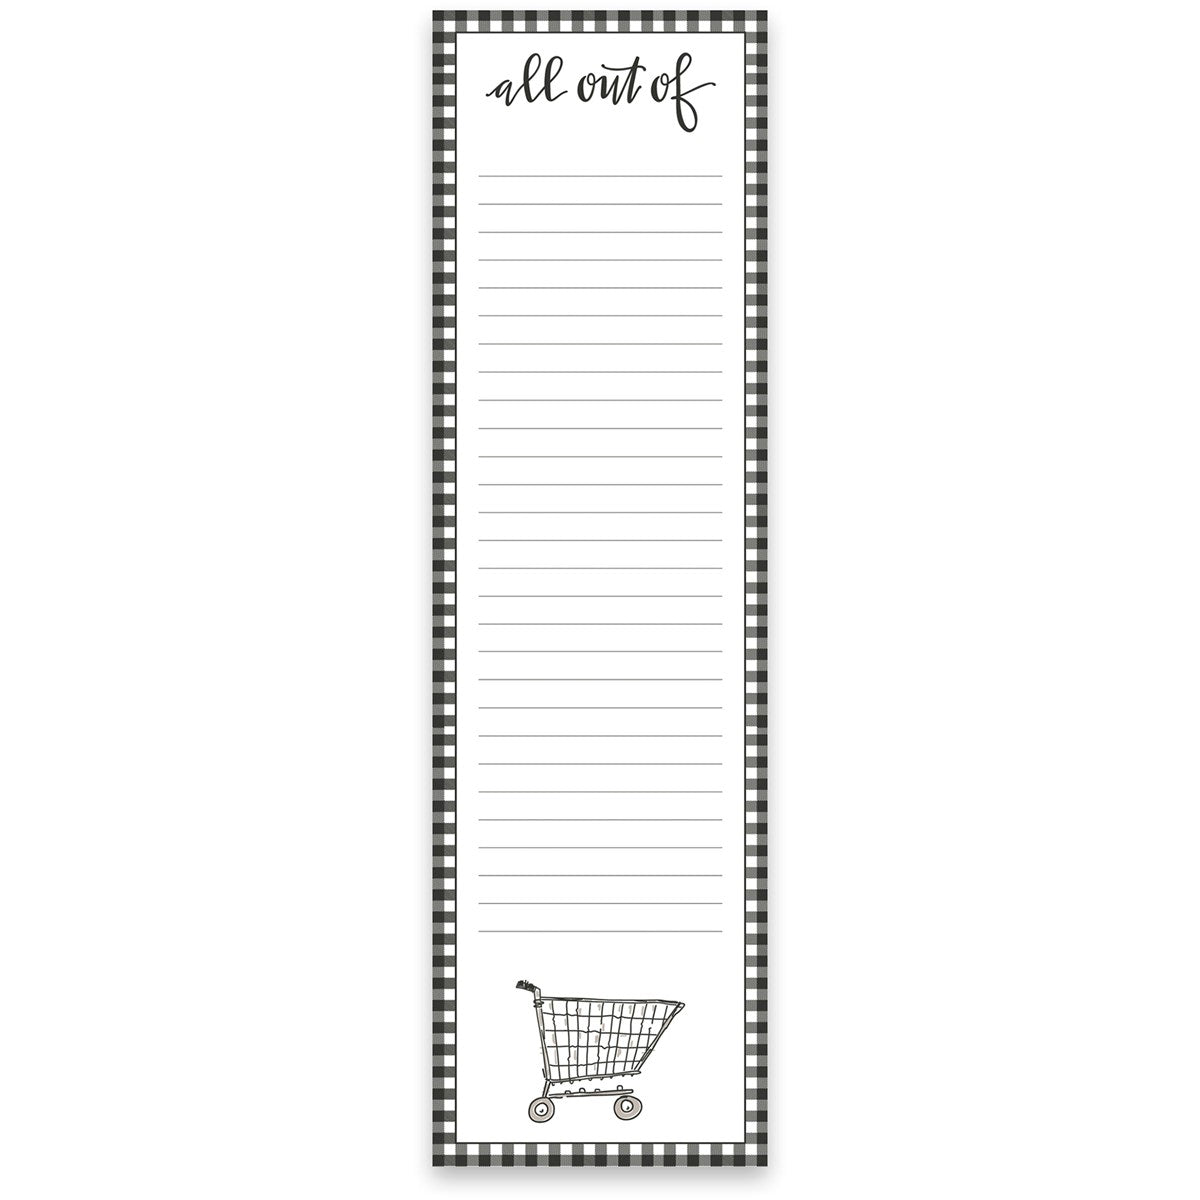 All out of - List note pad